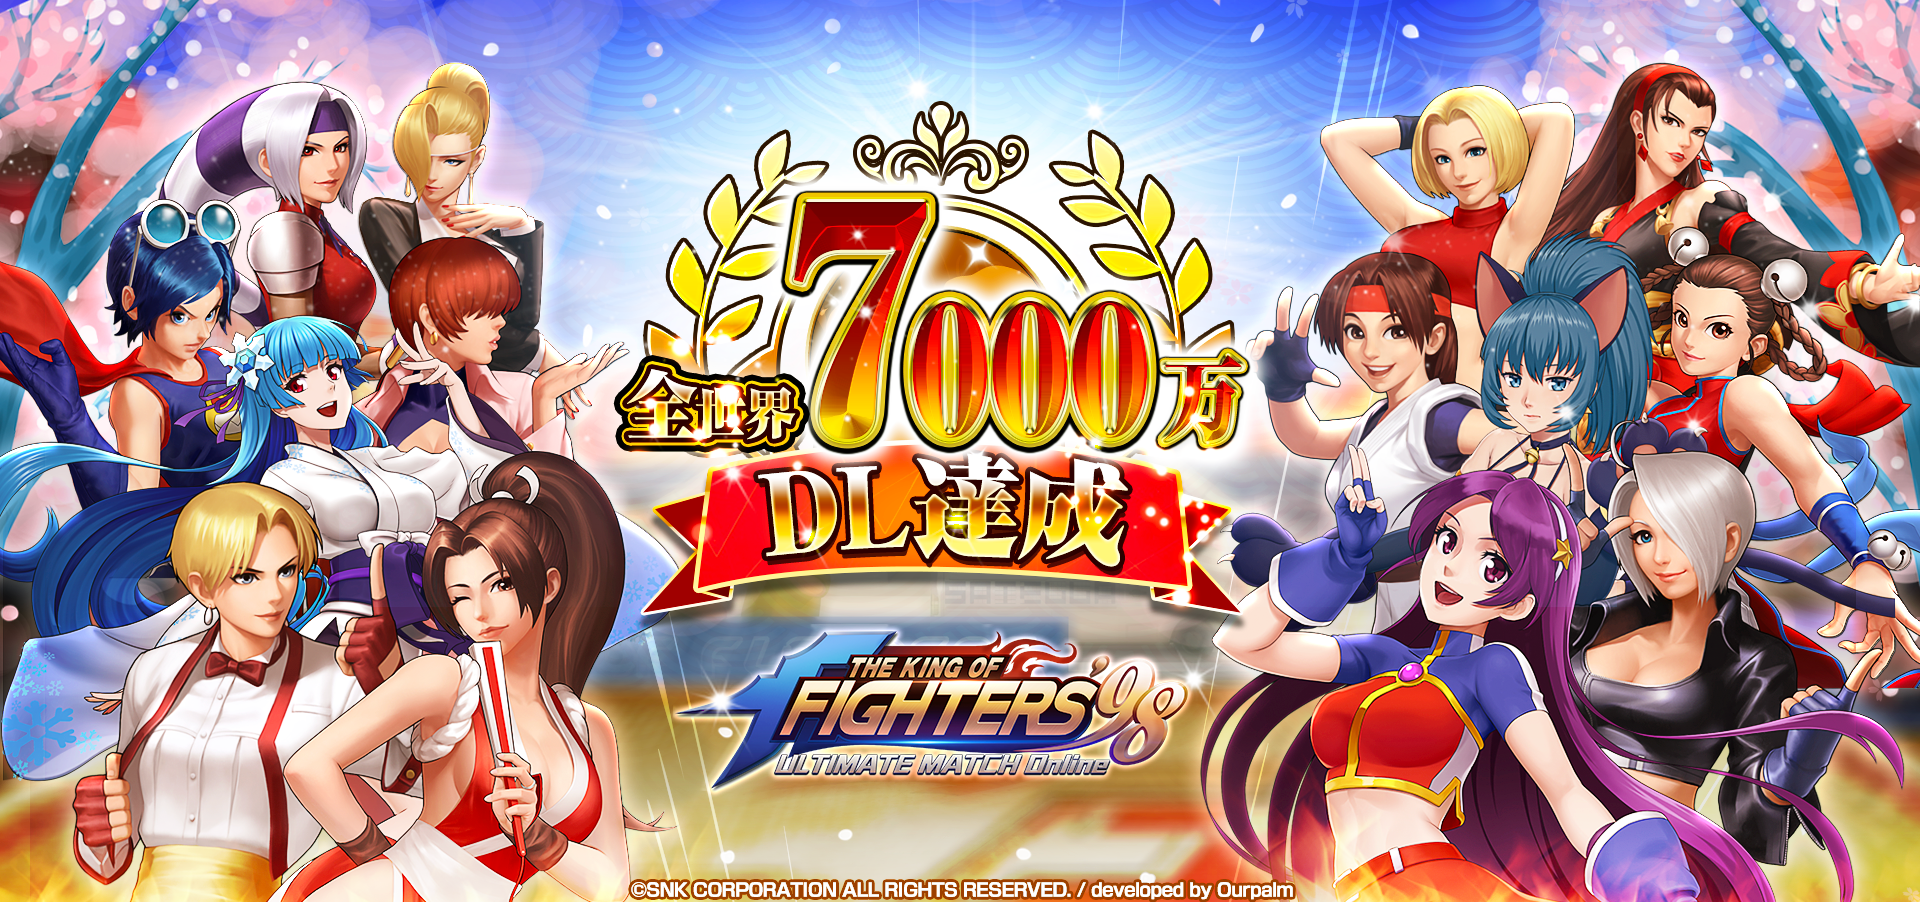 THE KING OF FIGHTERS '98 ULTIMATE MATCH Online』全世界累計